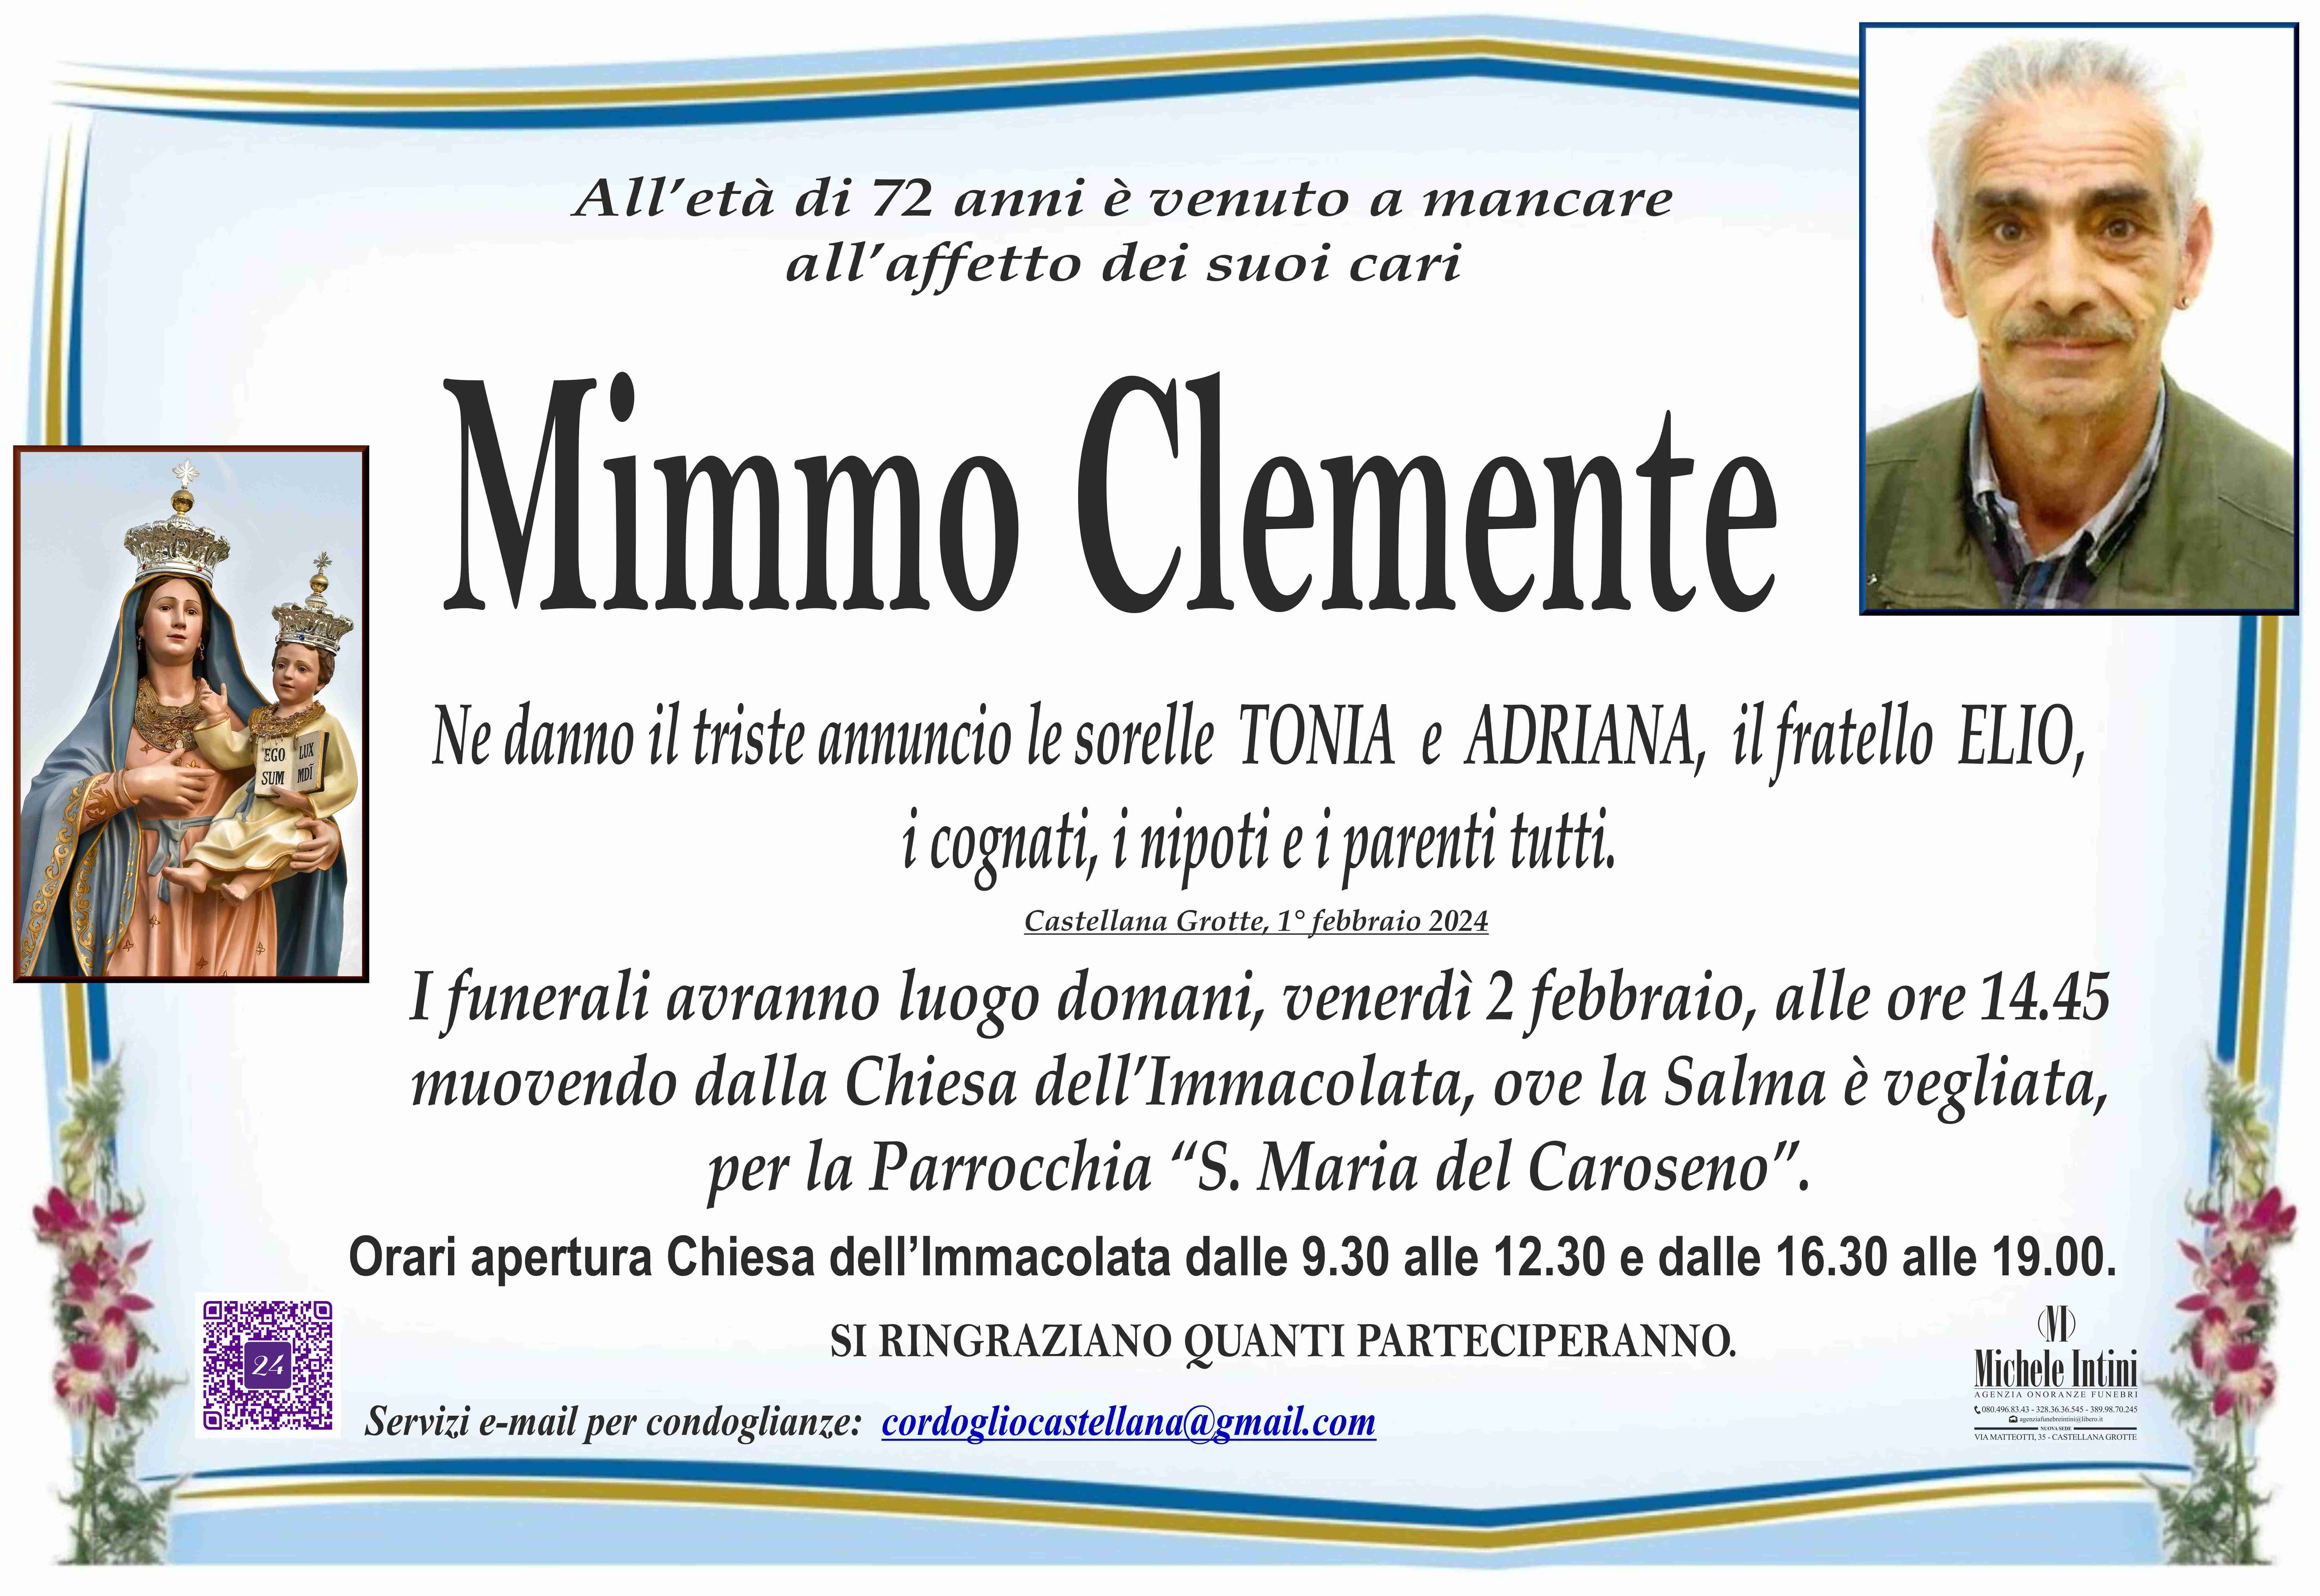 Mimmo Clemente